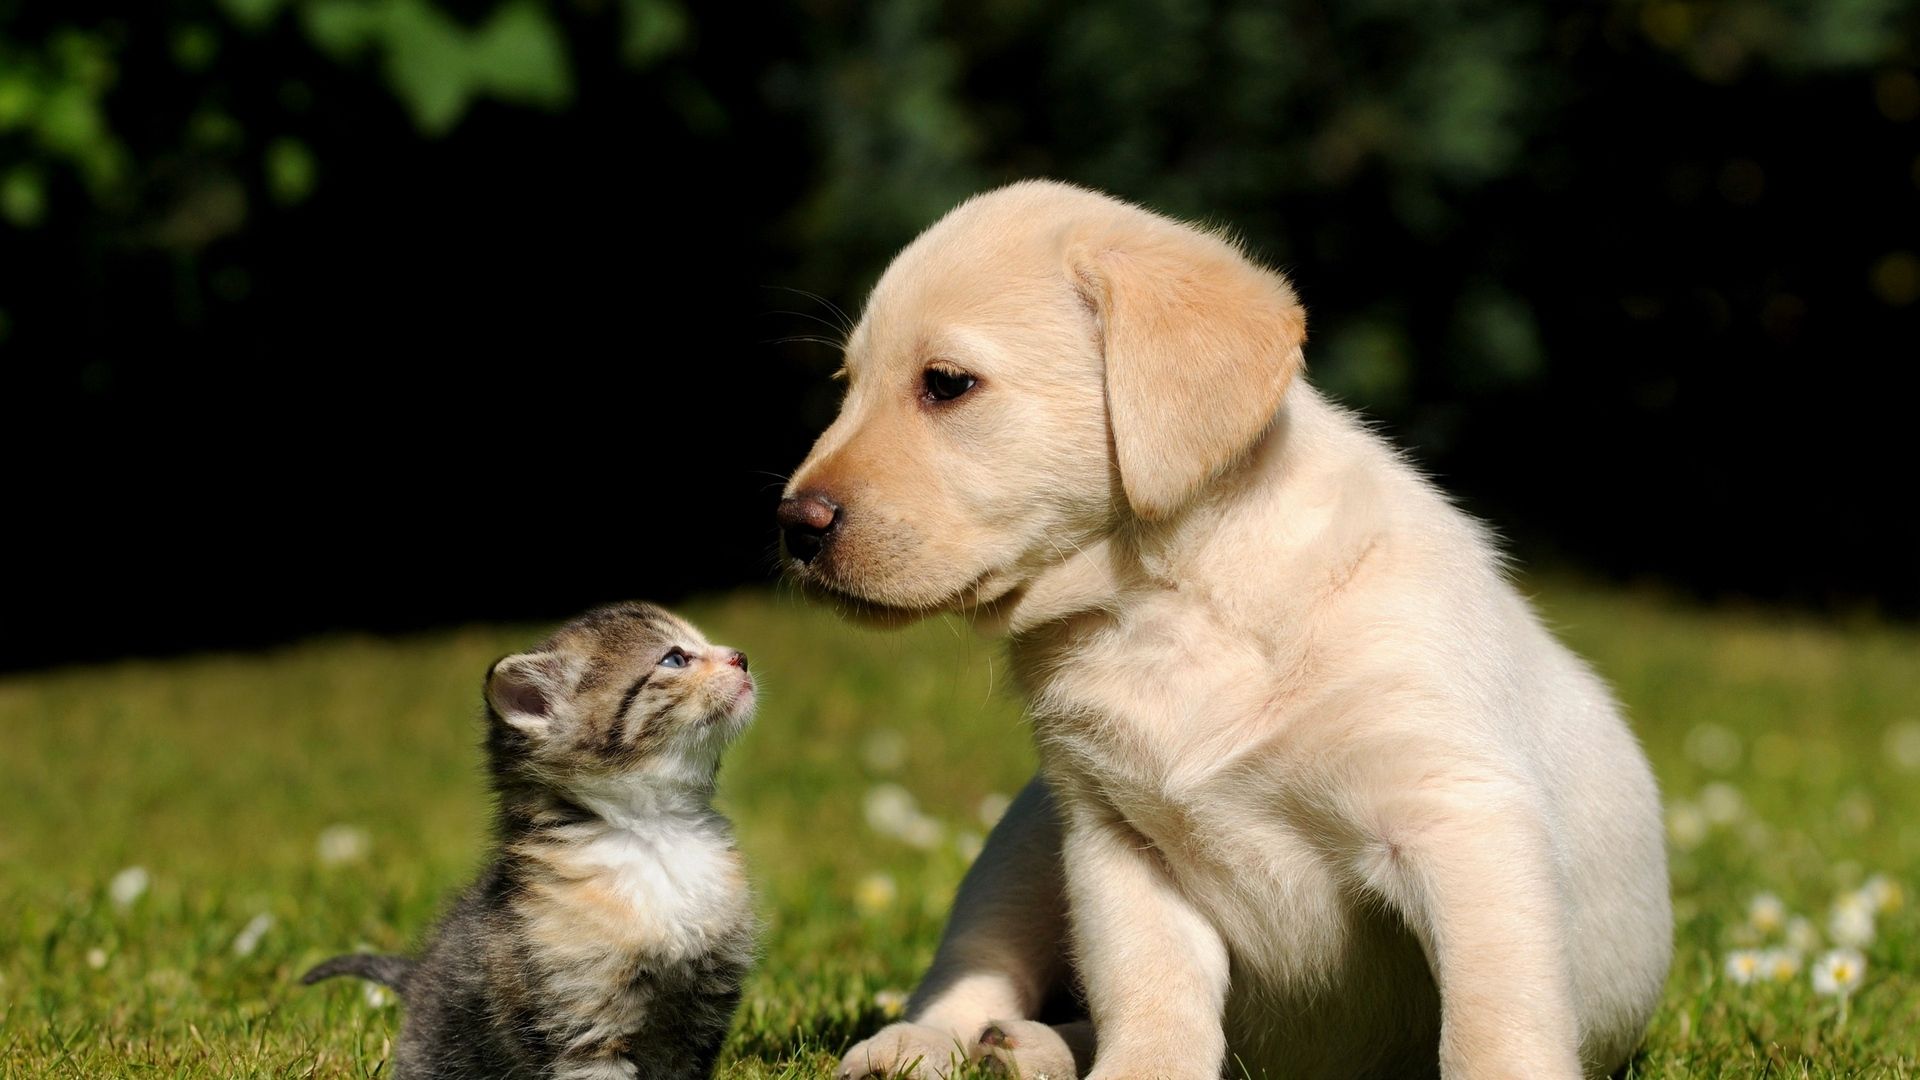 Puppy And Kitten Wallpaper Image